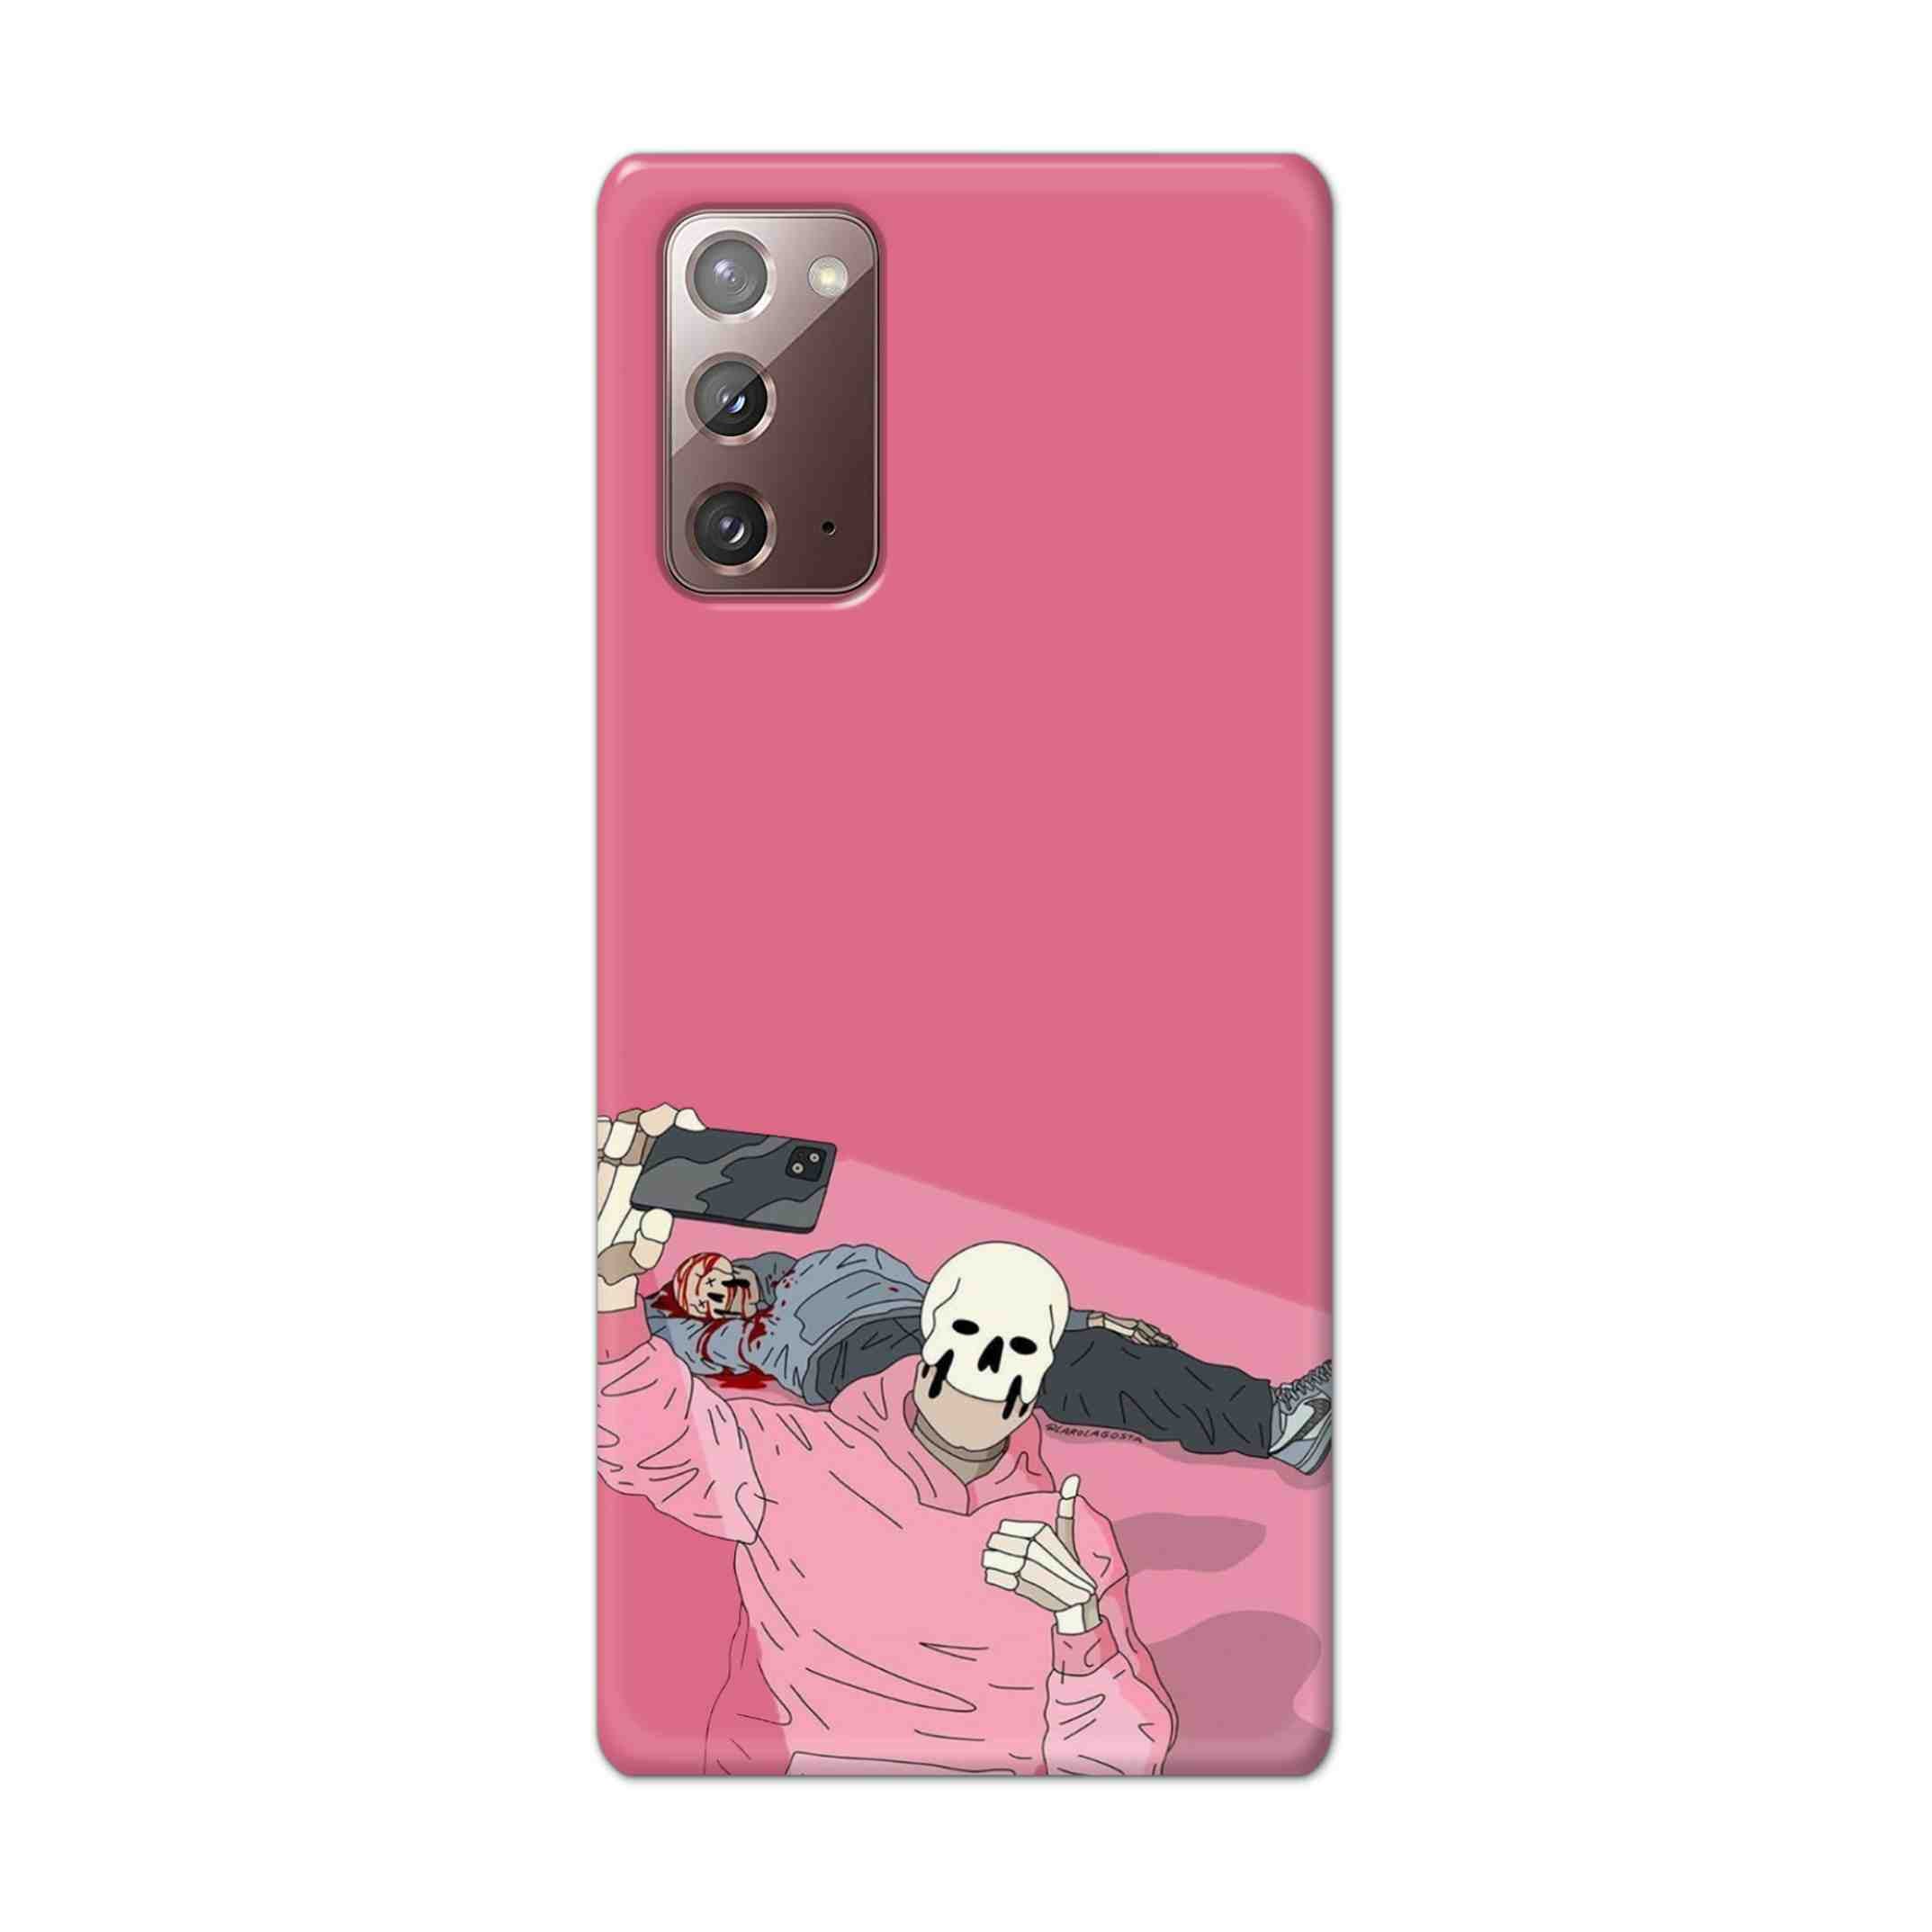 Buy Selfie Hard Back Mobile Phone Case Cover For Samsung Galaxy Note 20 Online